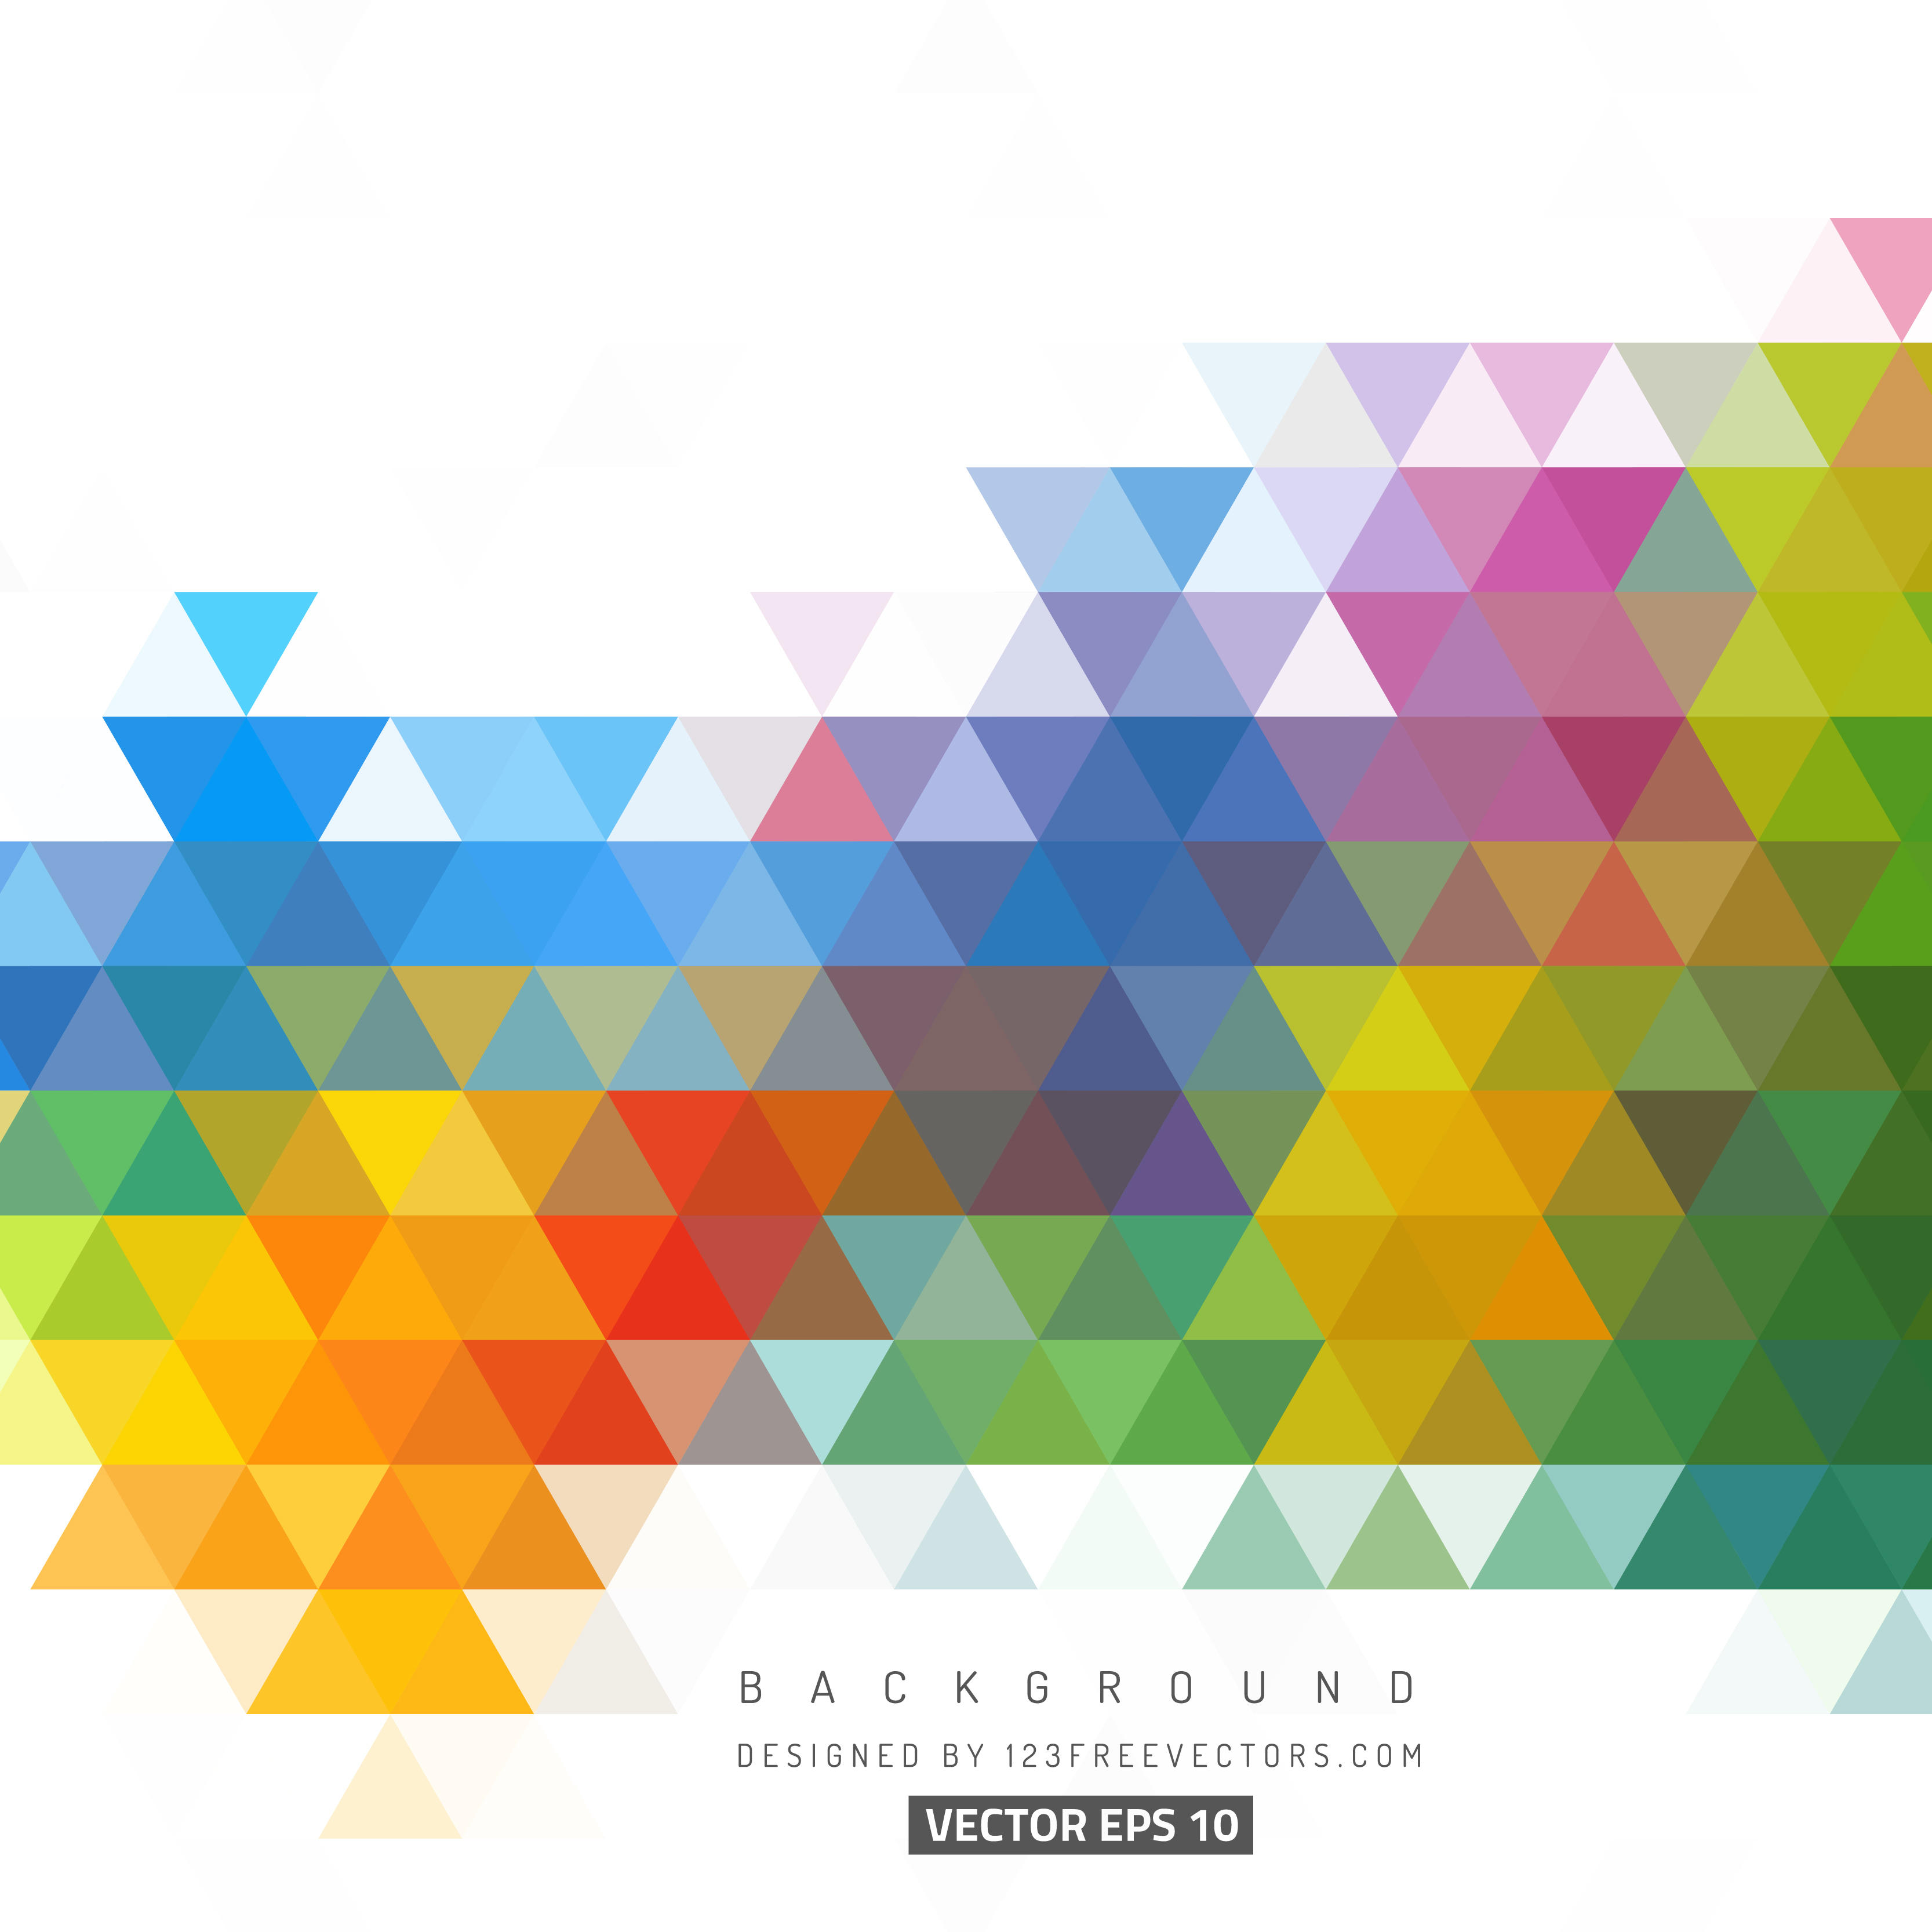 Triangle clipart background - Pencil and in color triangle clipart ...